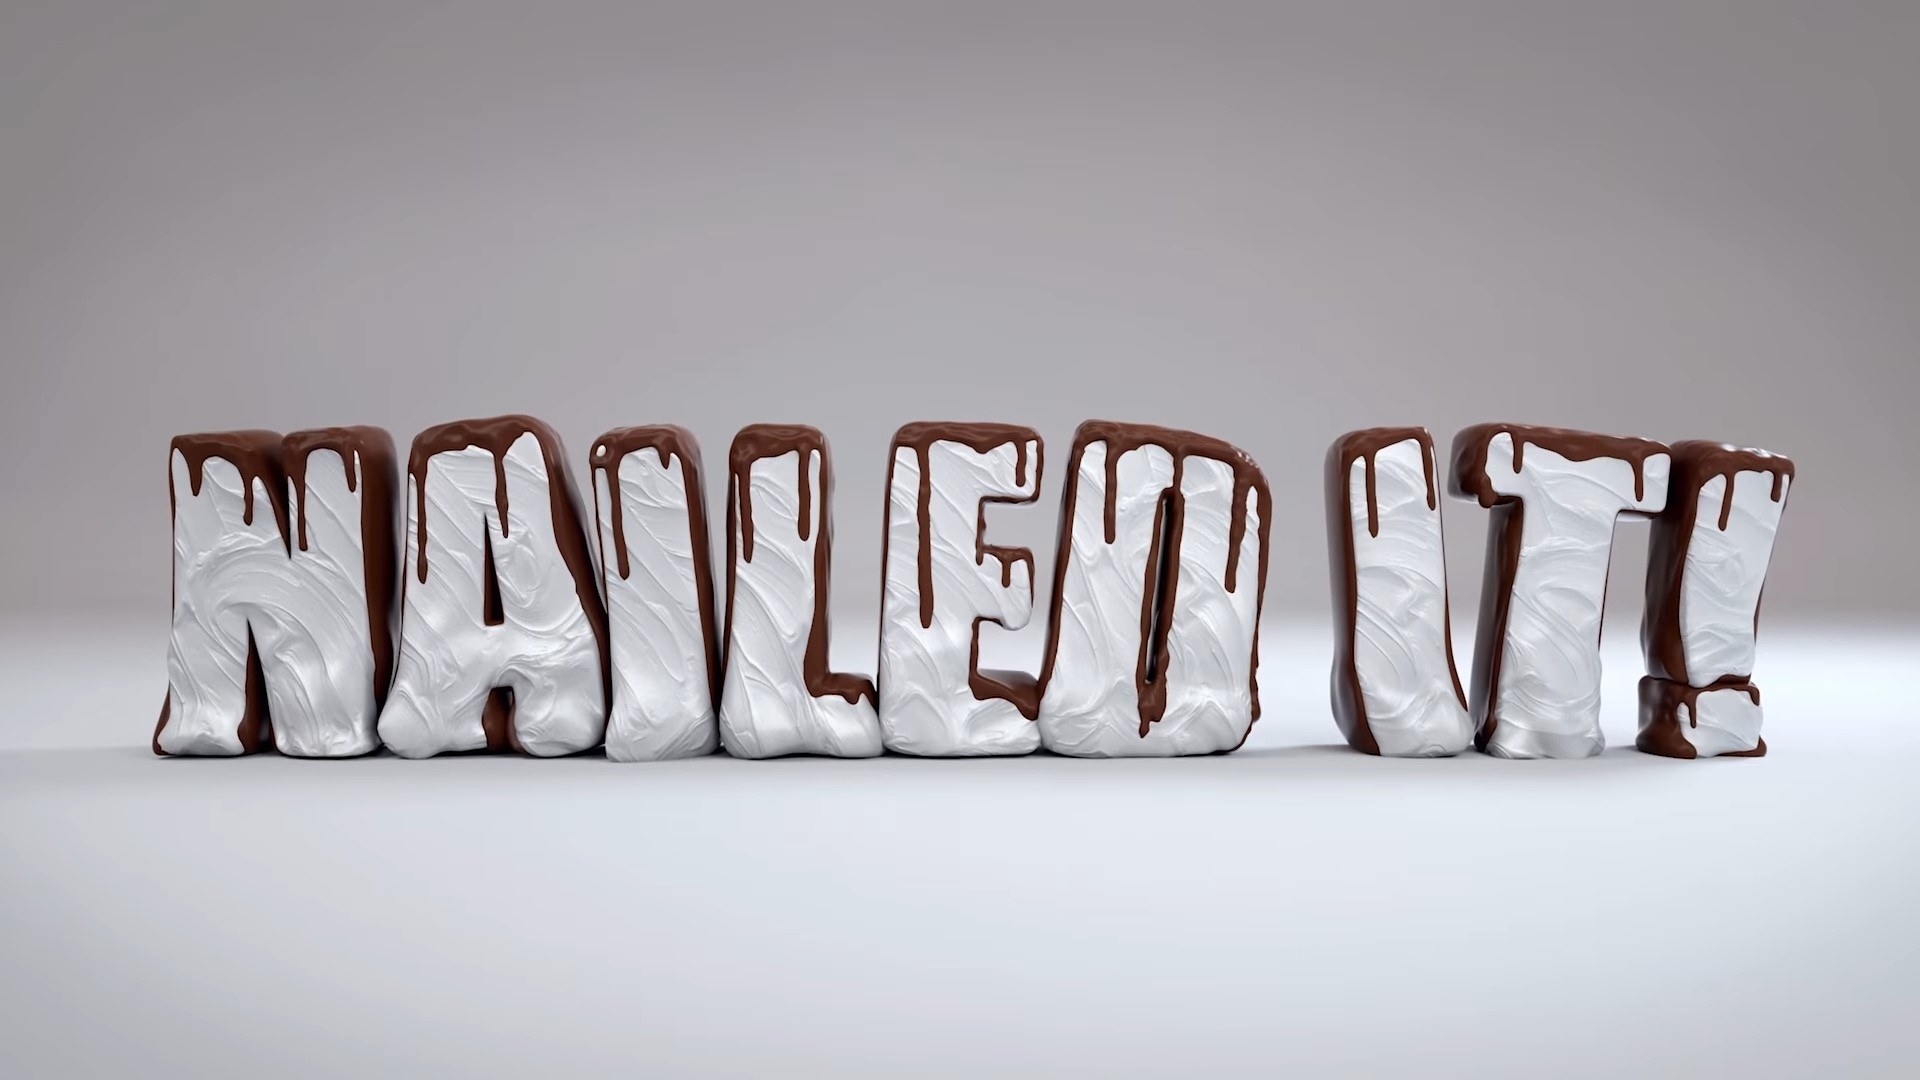 Title text for show with melted chocolate on top